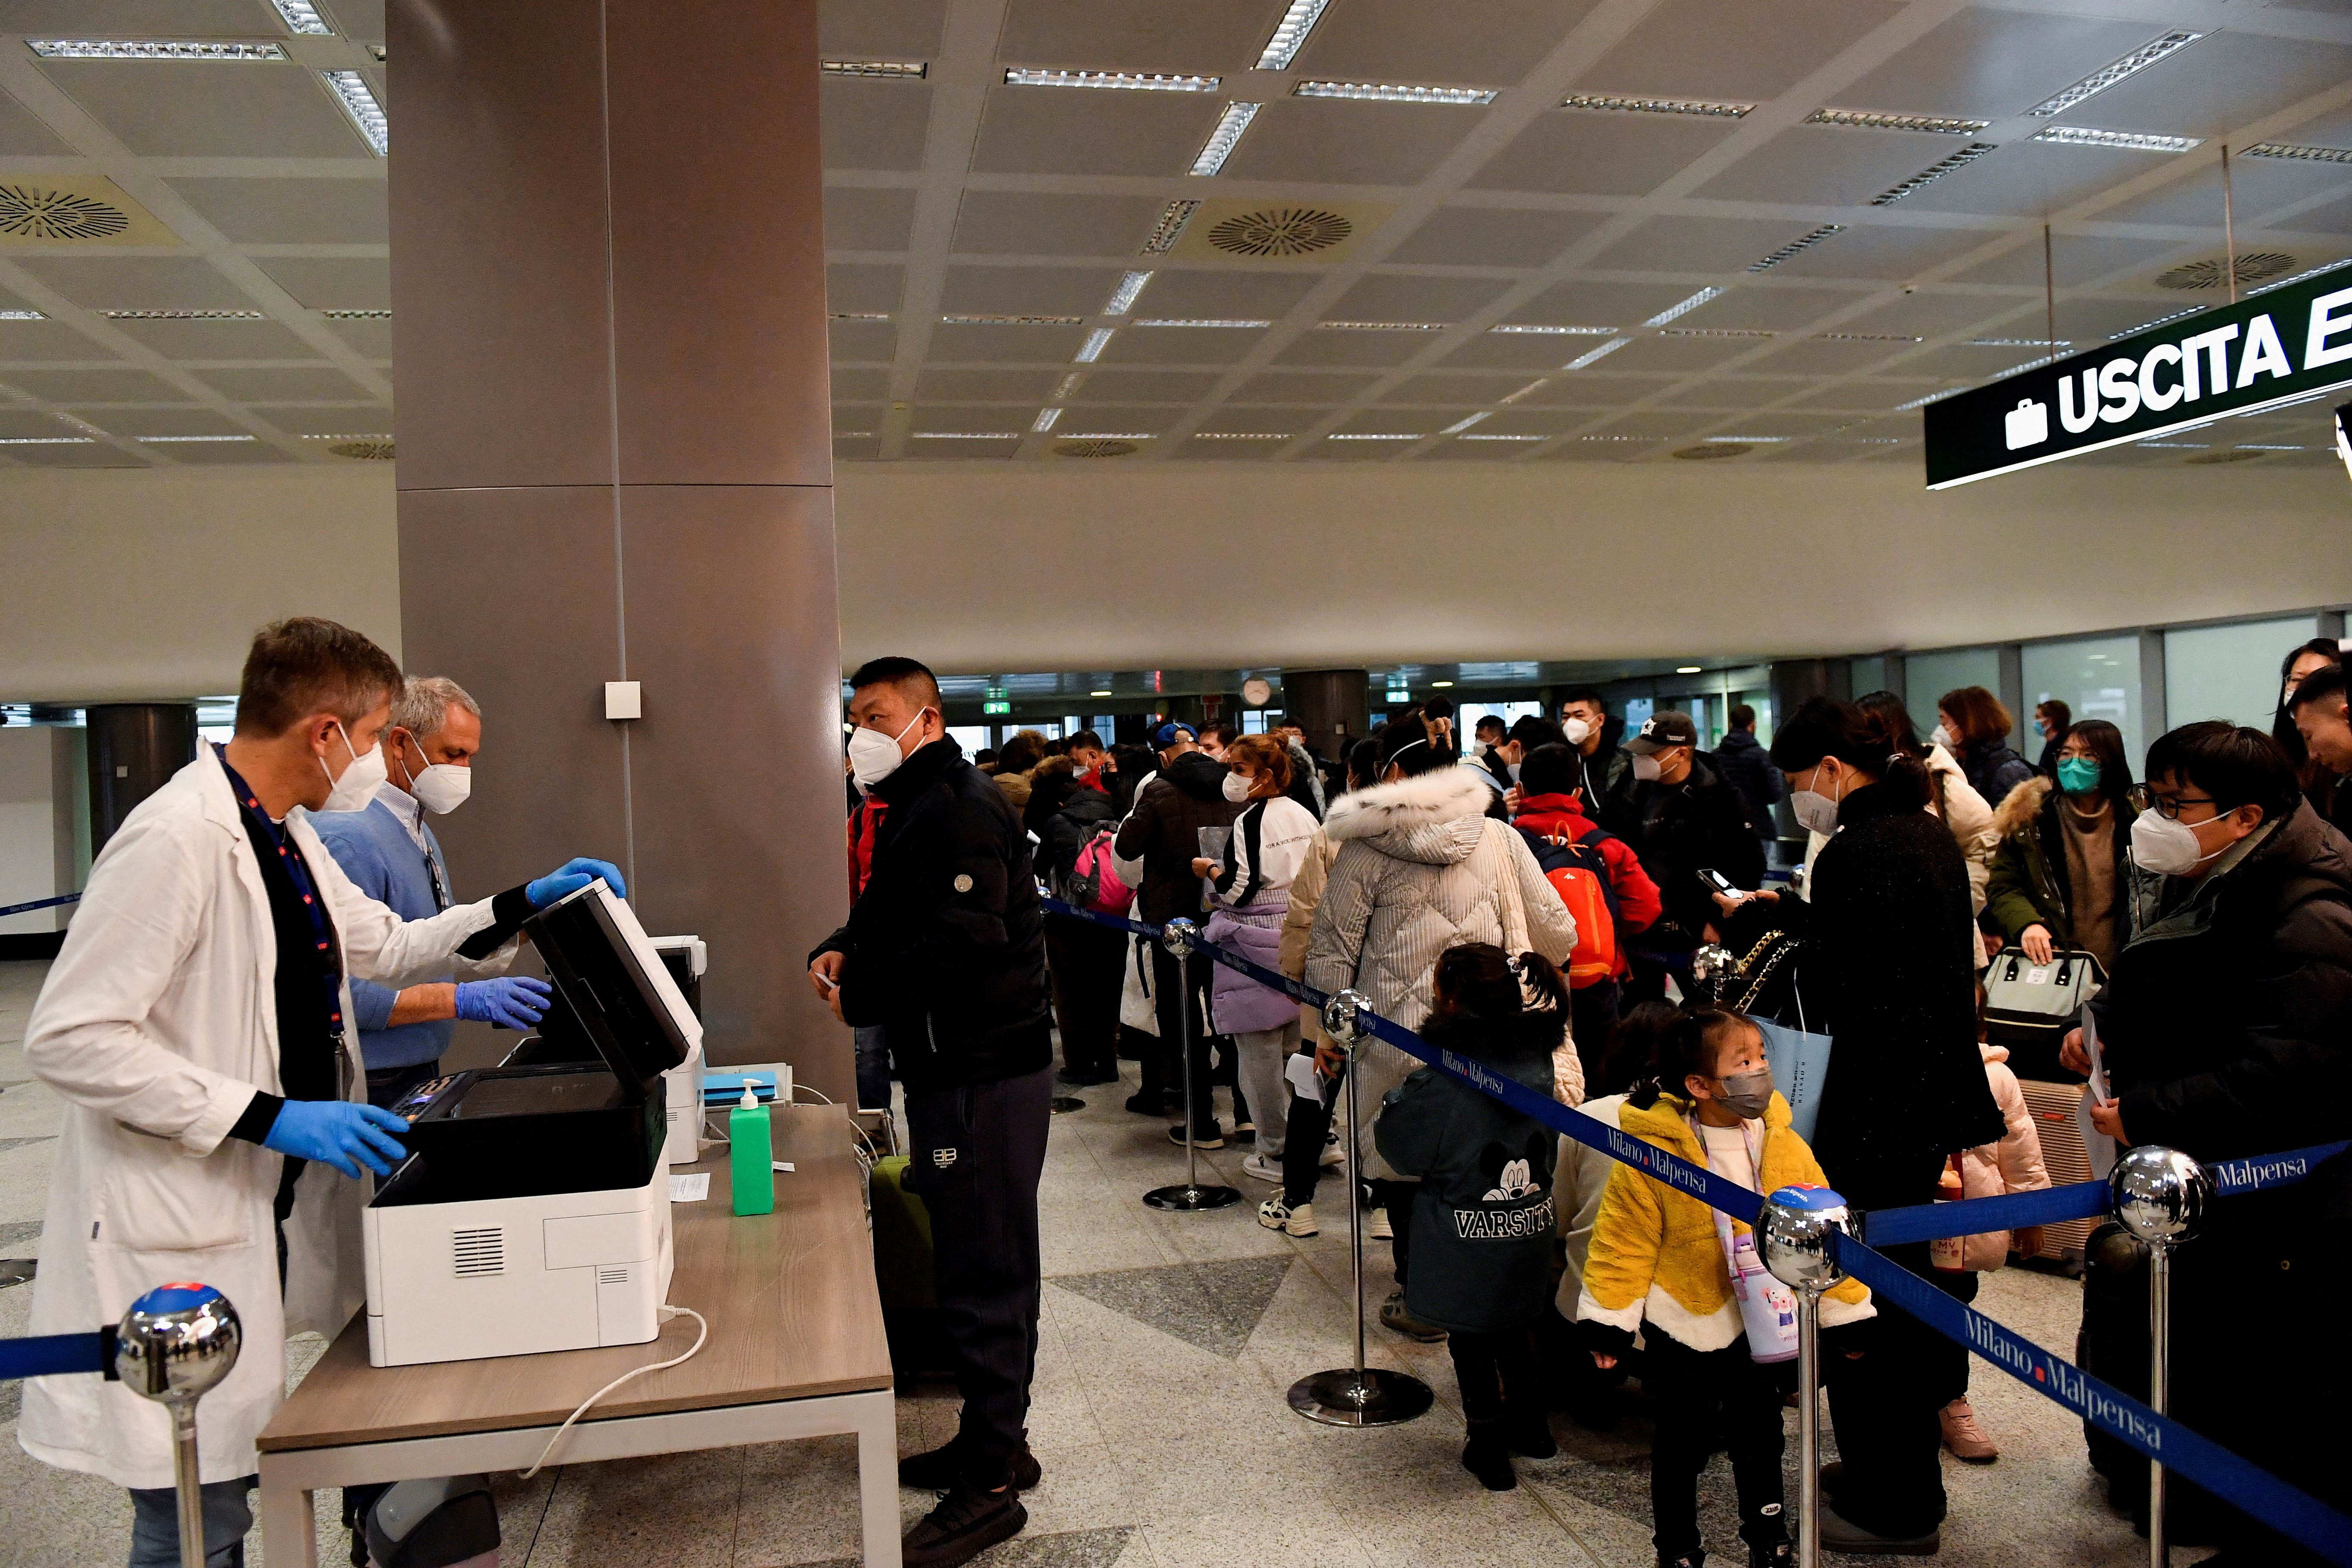 Italy imposes mandatory COVID-19 tests for travelers from China